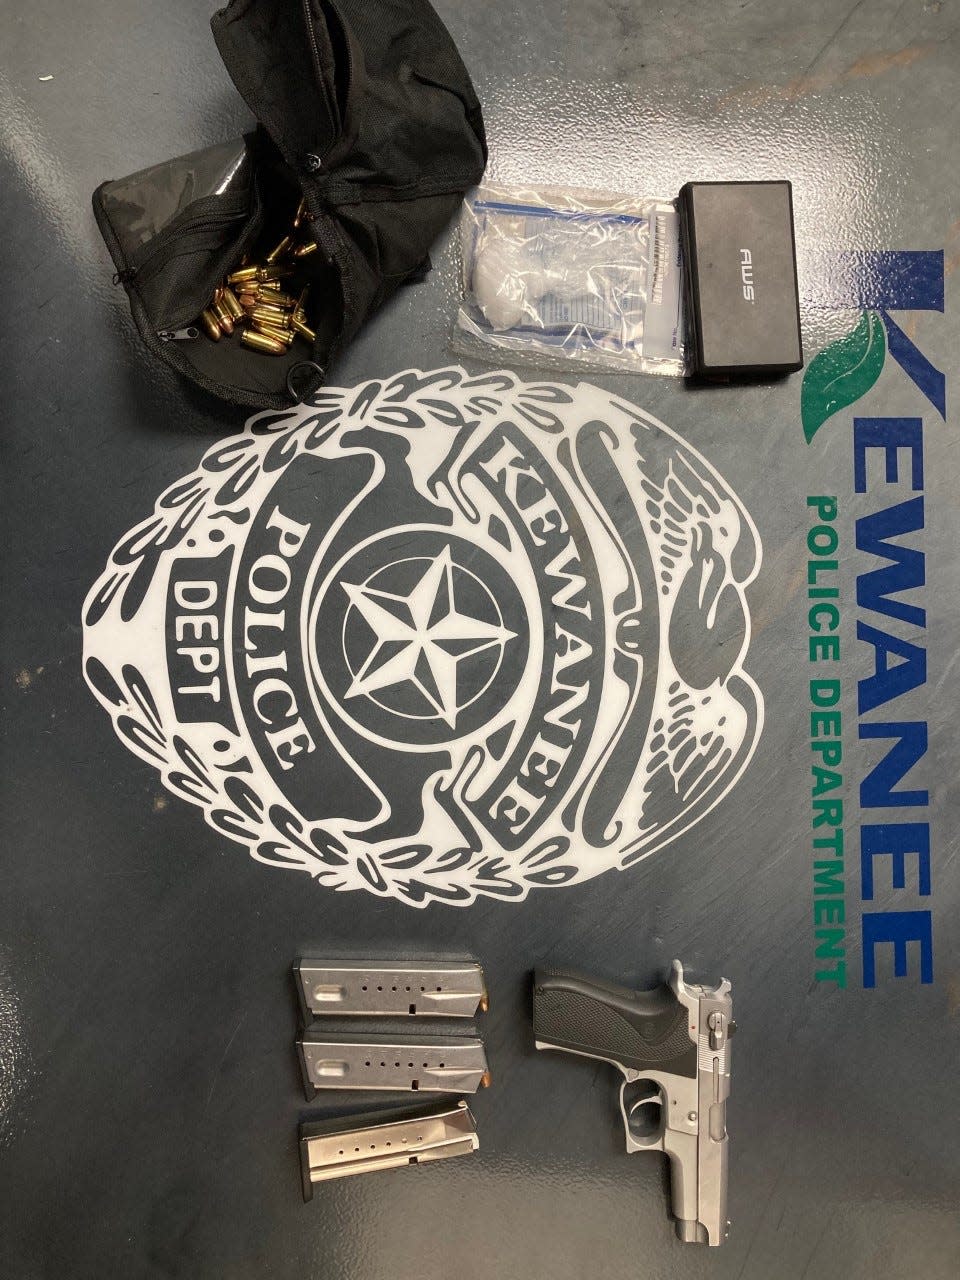 The second gun, ammunition and clips seized by Kewanee Police during a traffic stop last week.